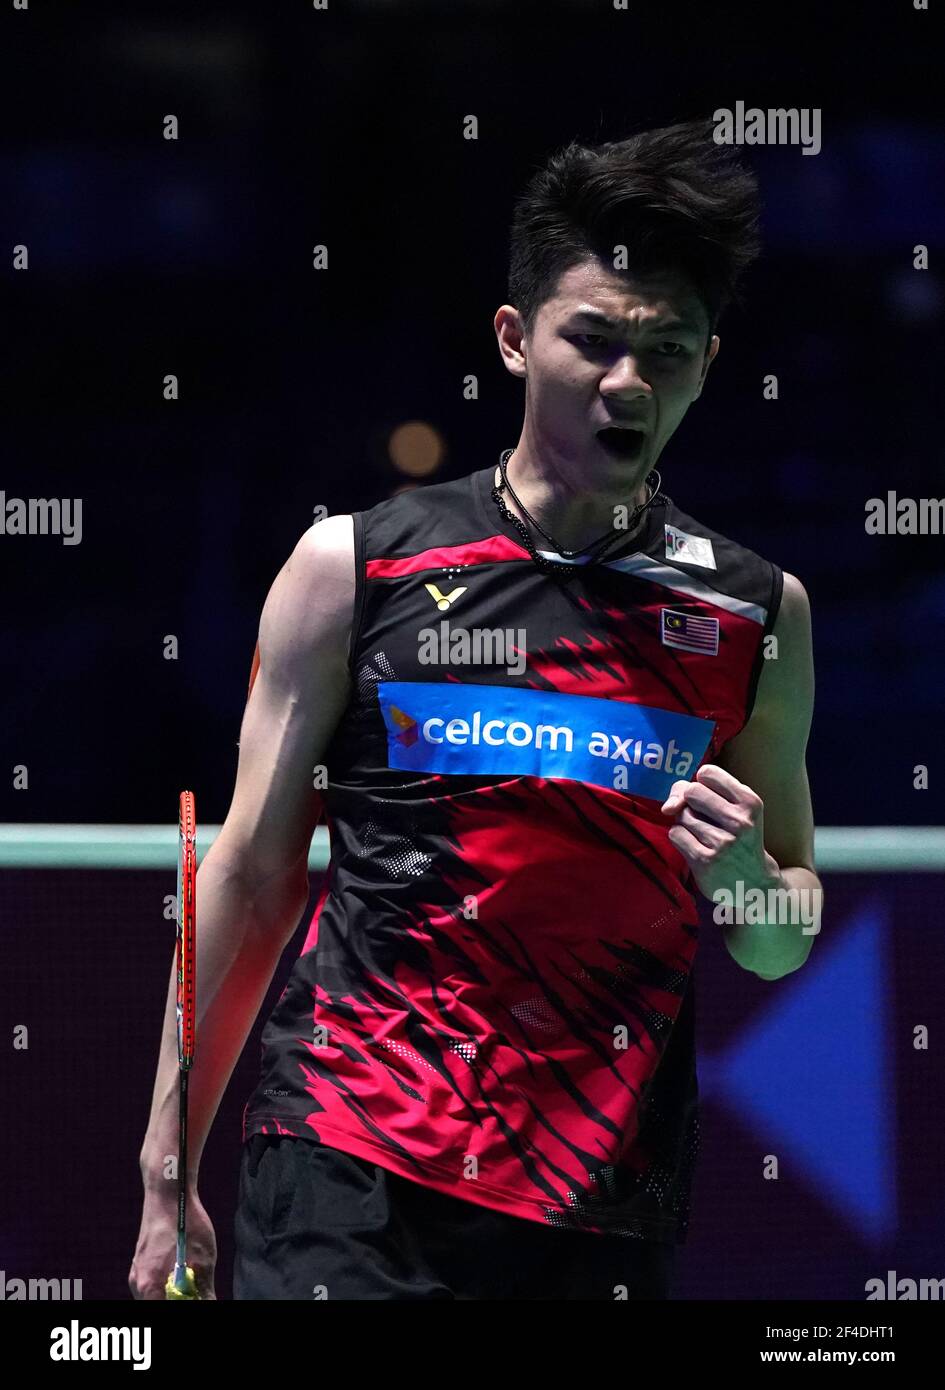 Malaysias Lee Zii Jia in action during his match against Netherlands Mark Carljouw on day four of the YONEX All England Open Badminton Championships at Utilita Arena Birmingham